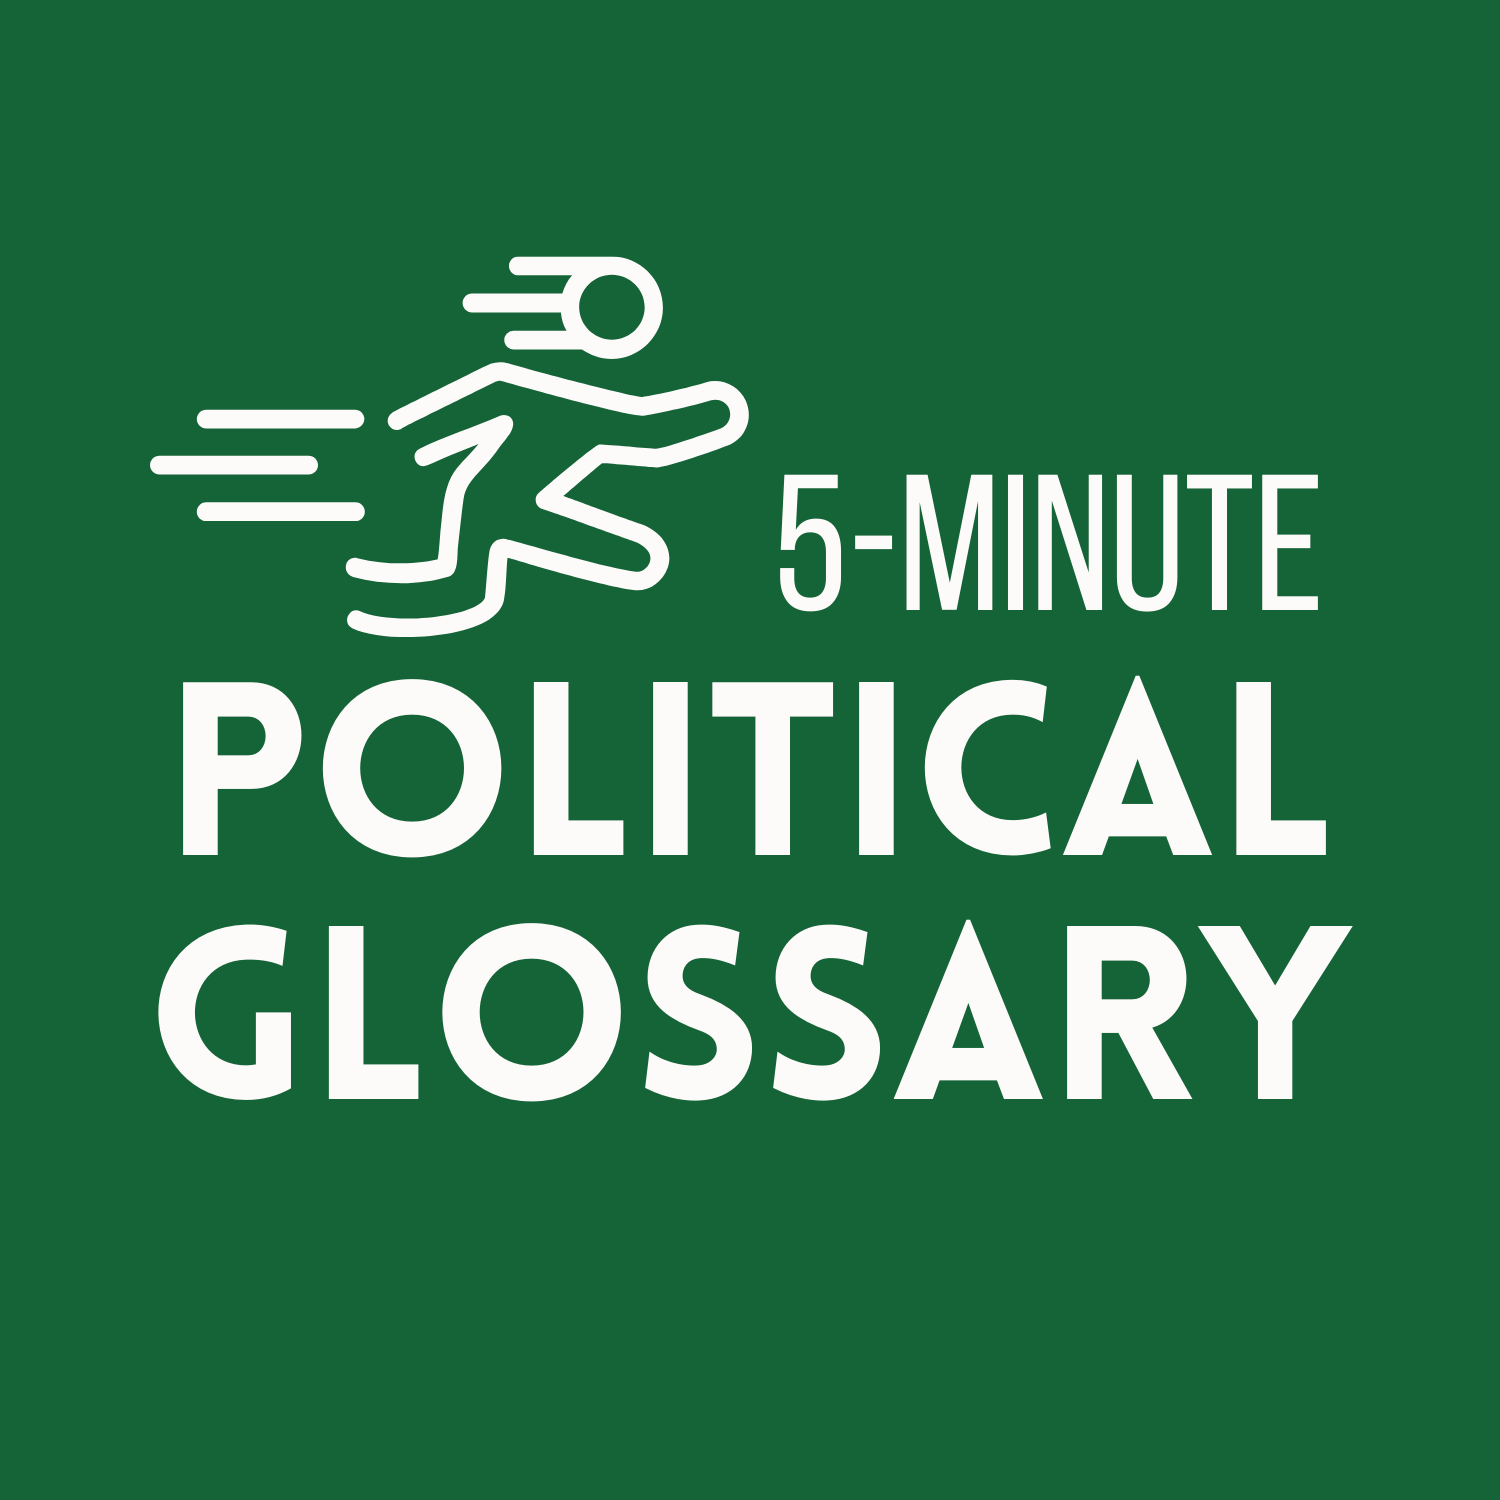 Artwork for 5 Minute Political Glossary